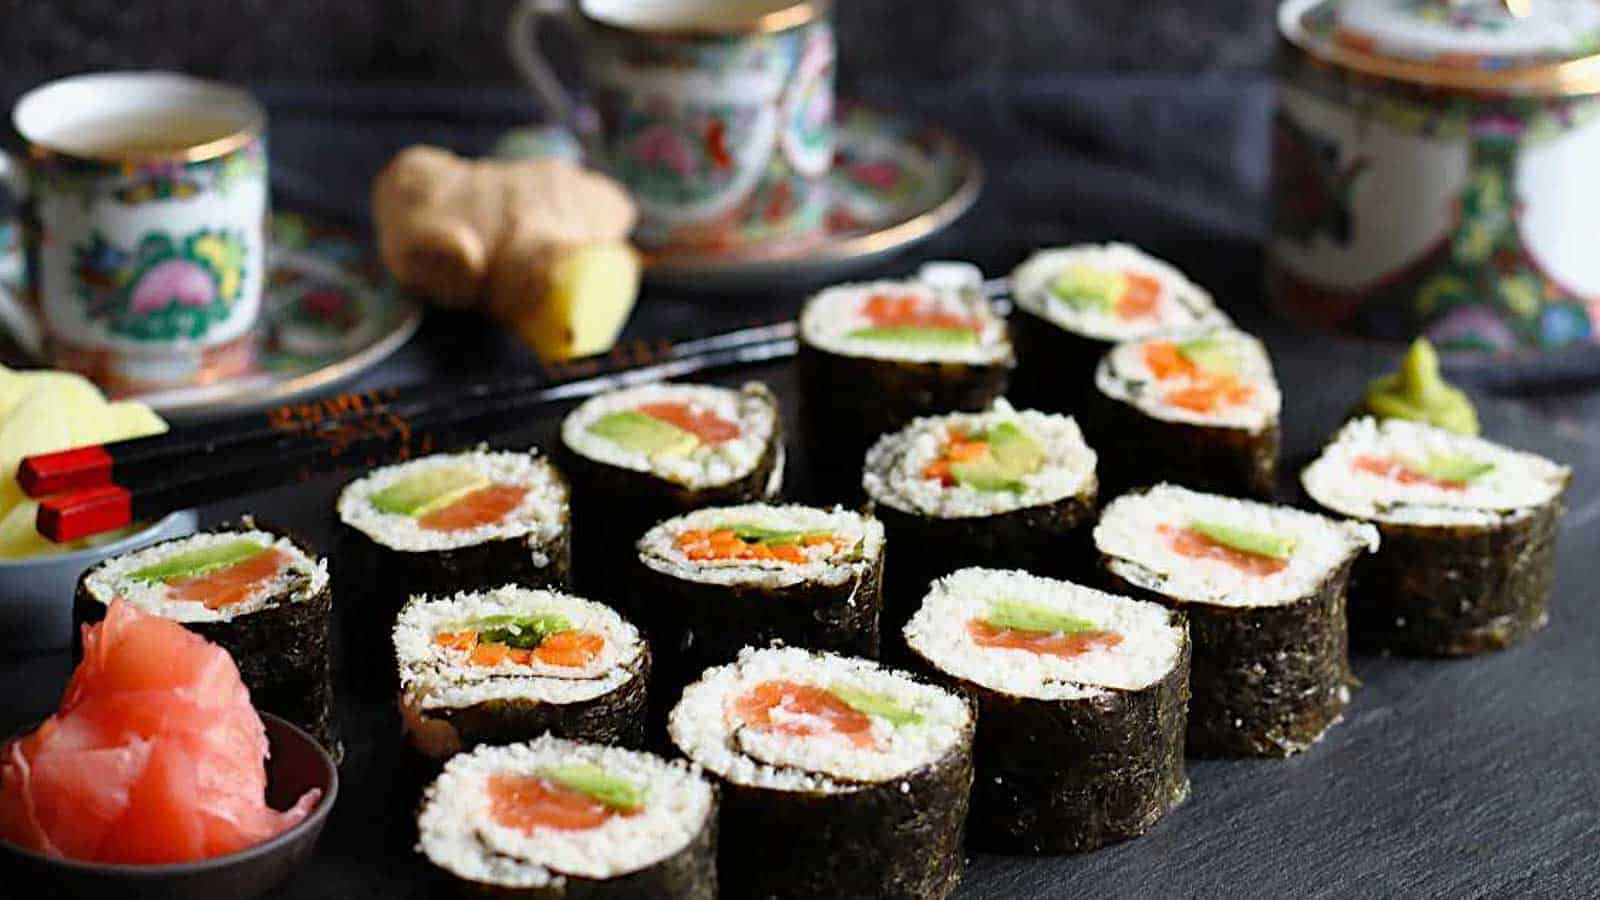 Japanese sushi rolls on a plate with chopsticks.